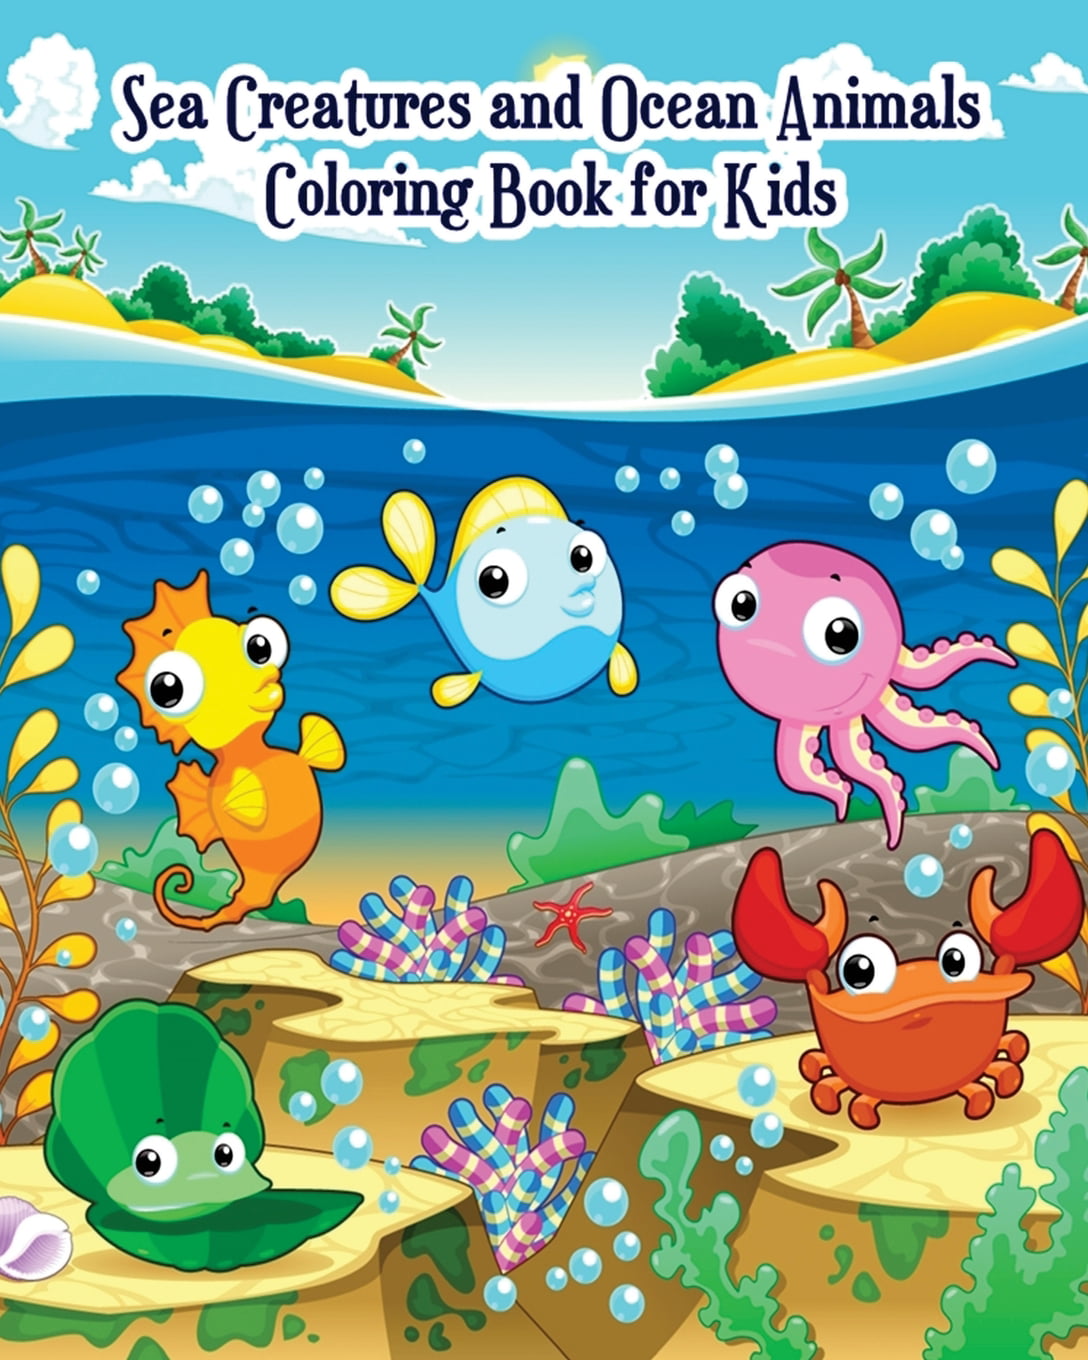 Sea Creatures and Ocean Animals Coloring Book for Kids  For Kids Ages 20 20,  20 20, Boys and Girls, Easy Coloring Pages for Little Hands with Thick ...